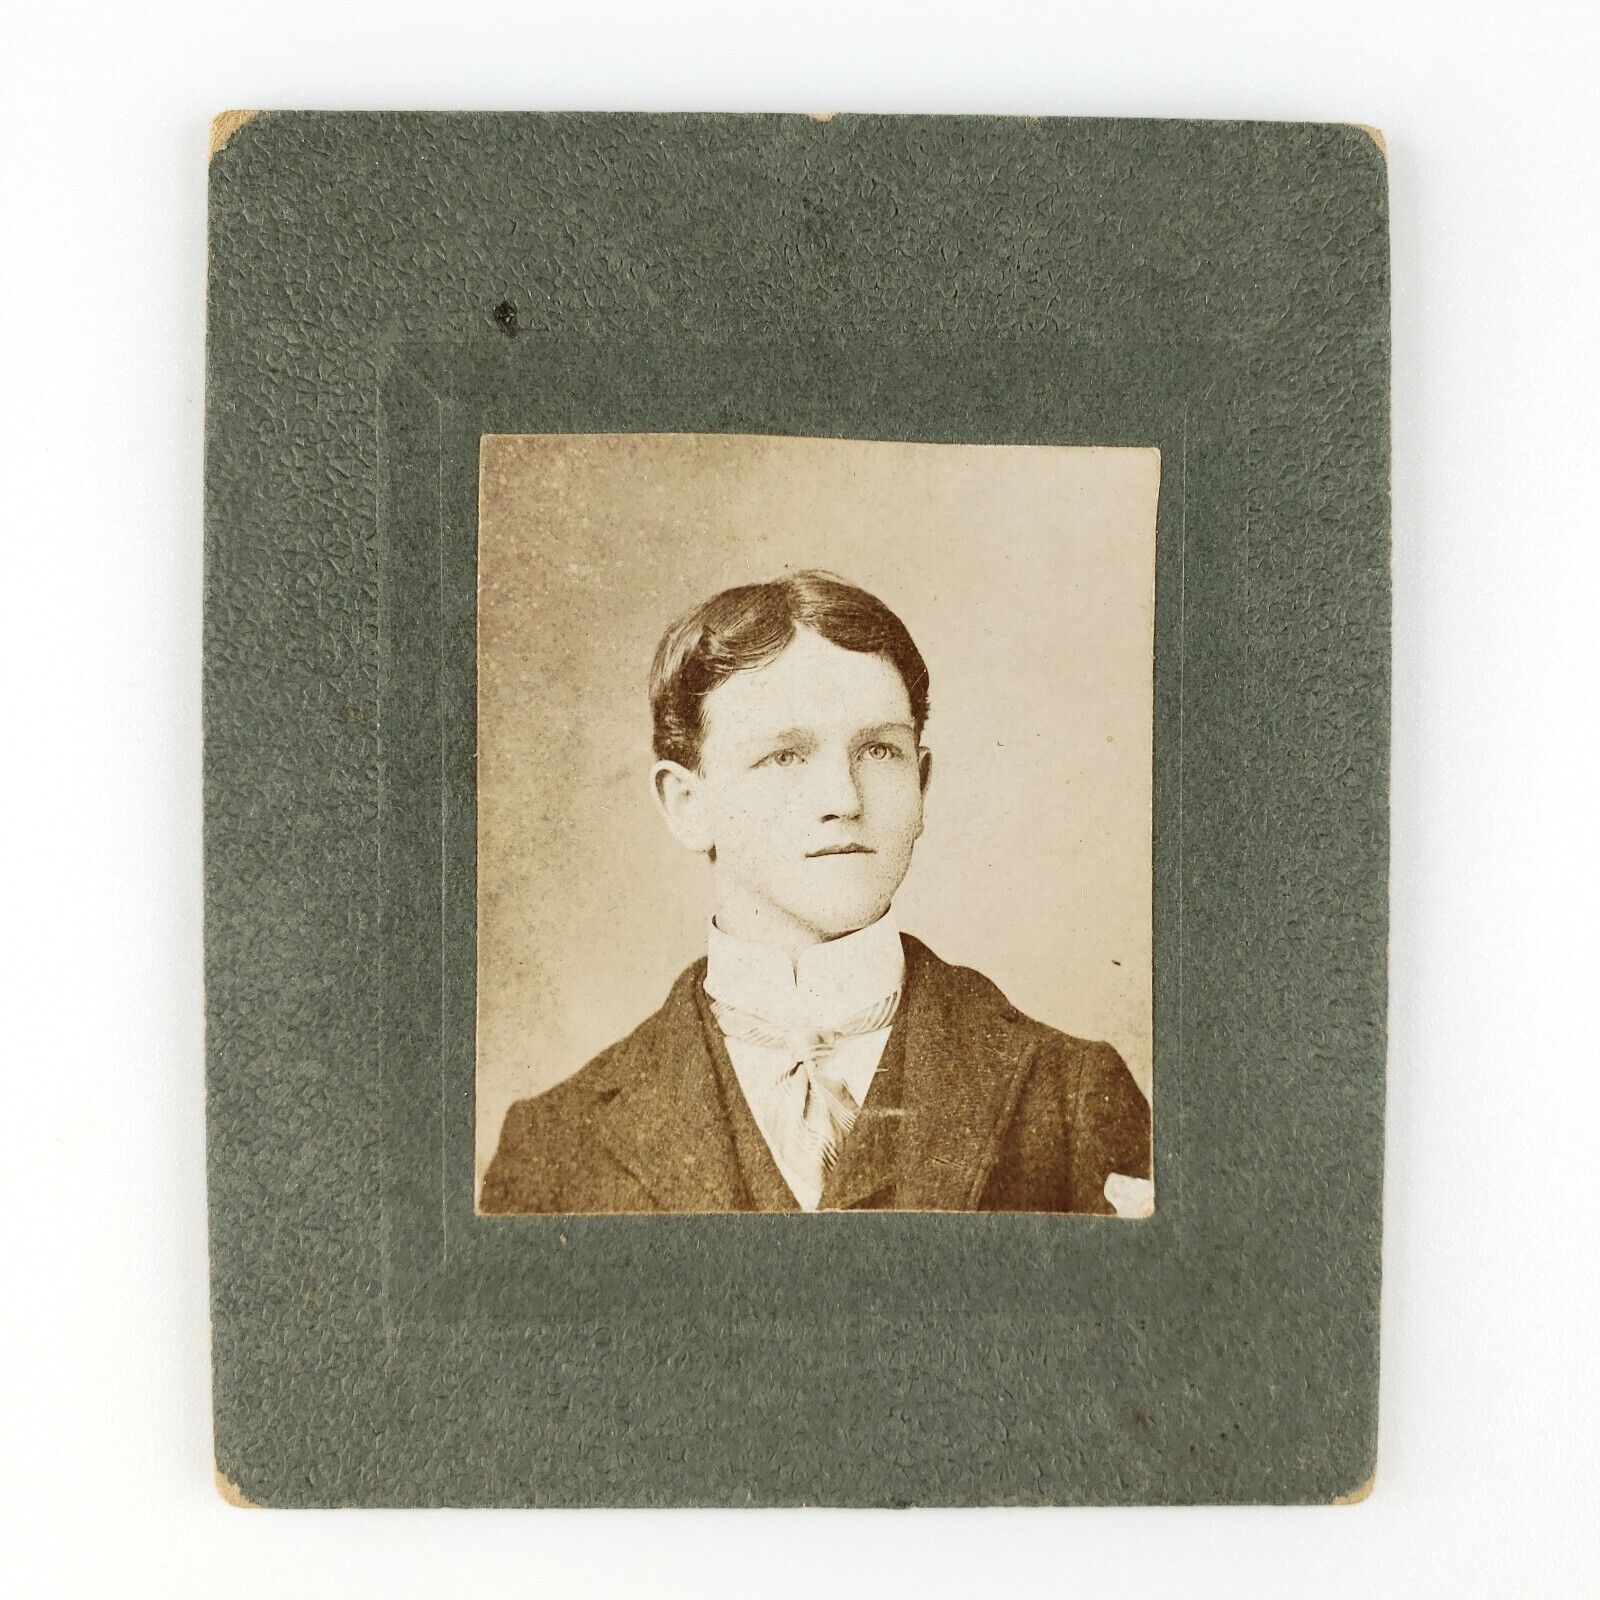 Middle-Parted Young Man Photo c1892 Antique Card-Mounted Small Portrait D1791